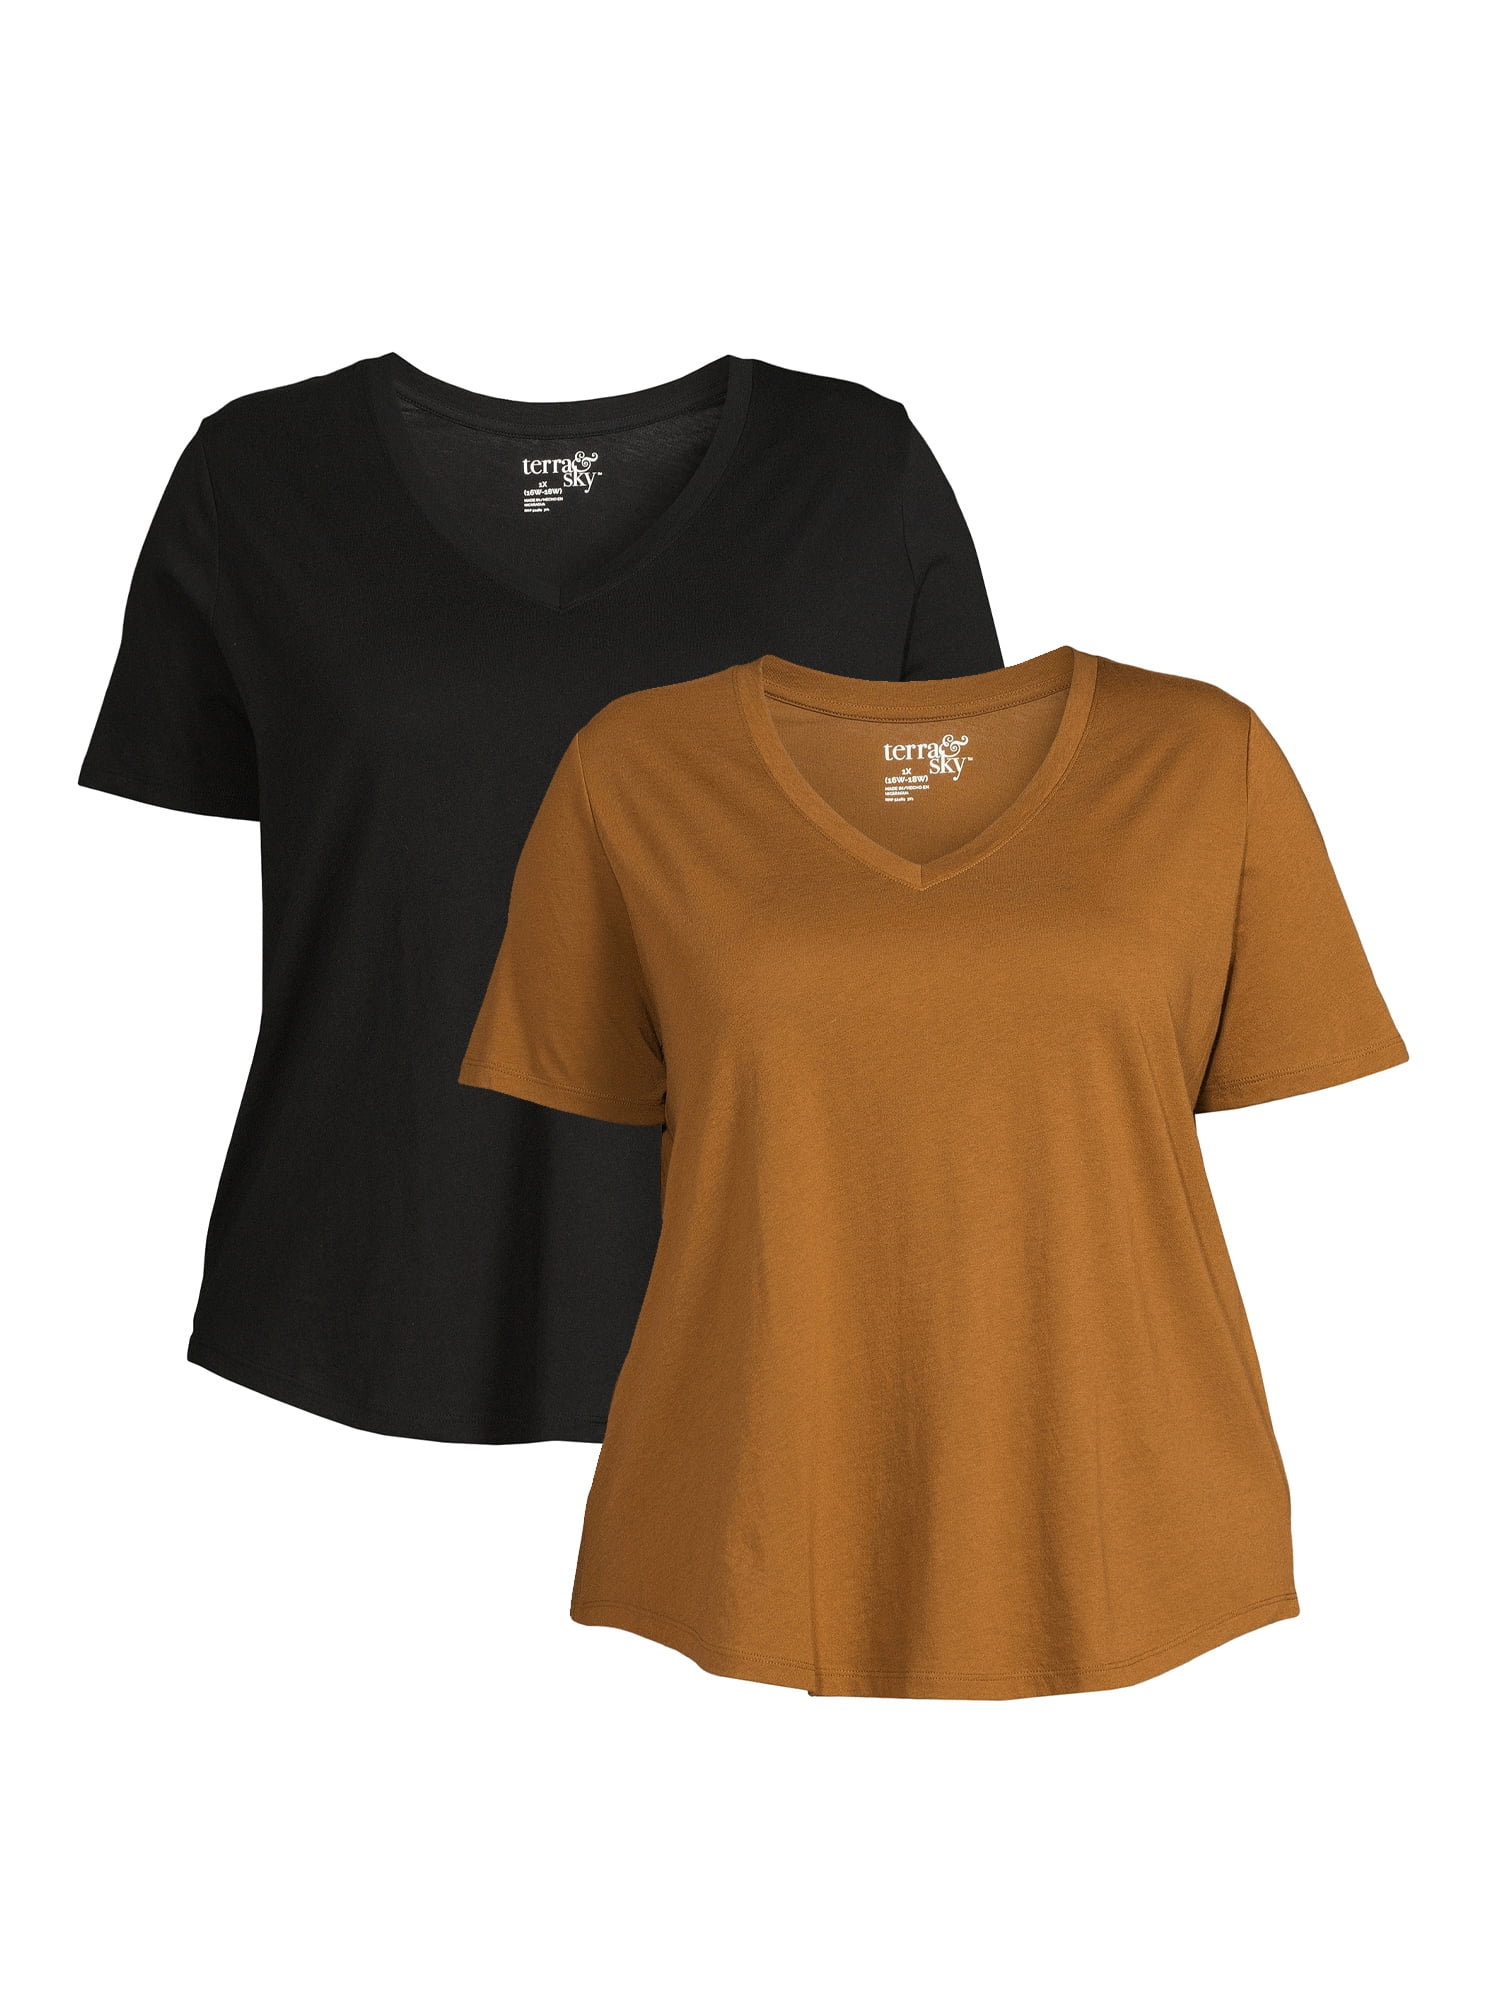 Terra & Sky Women's Plus Size T-Shirt with Short Sleeves, 2-Pack -